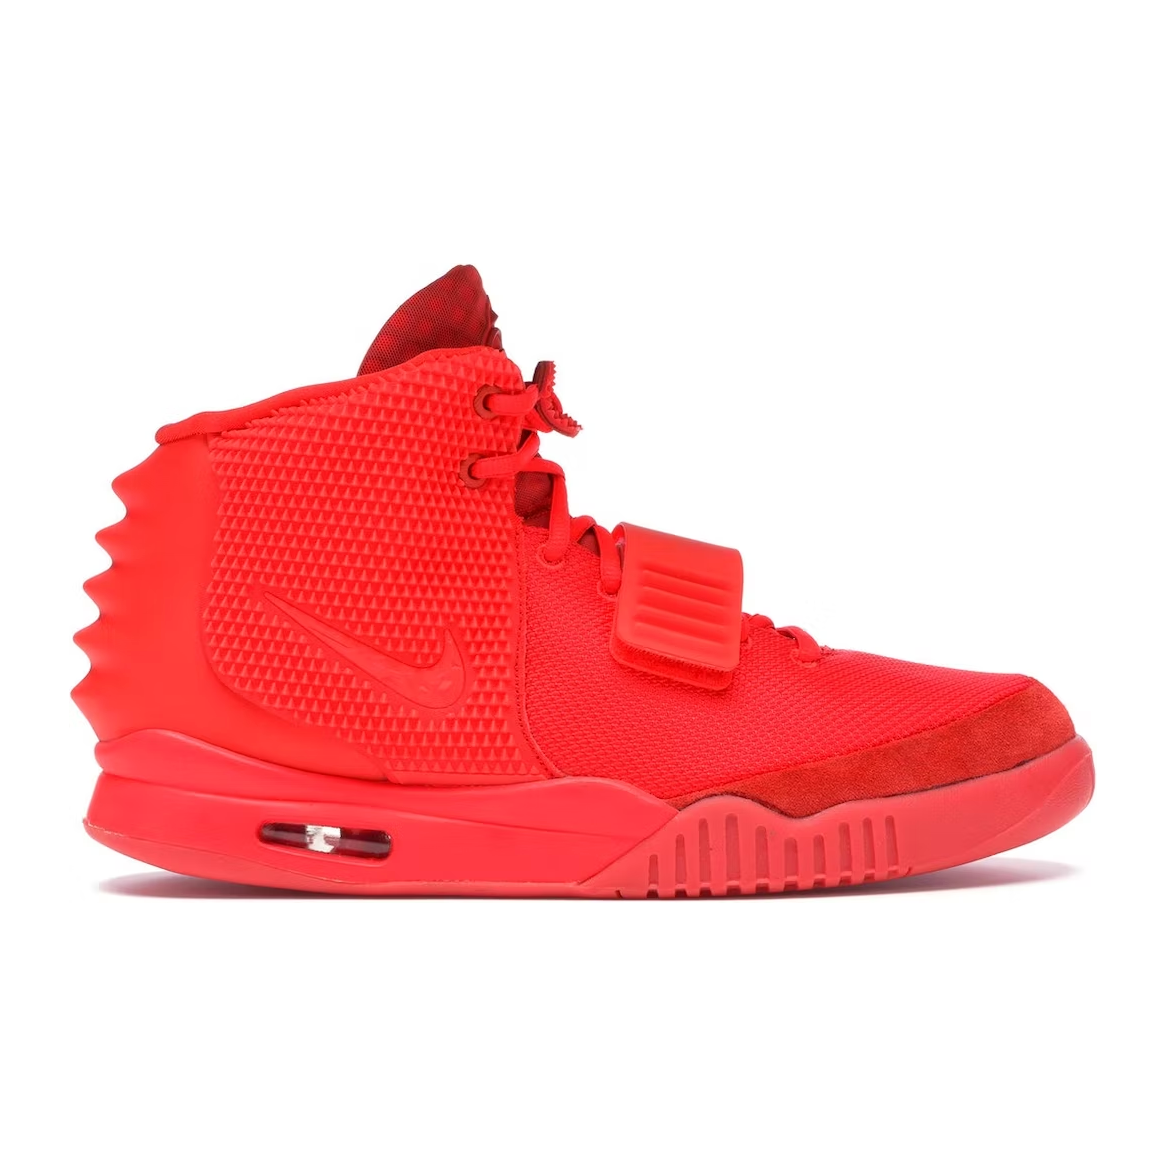 Nike Air Yeezy 2 Red October (pre-owned)